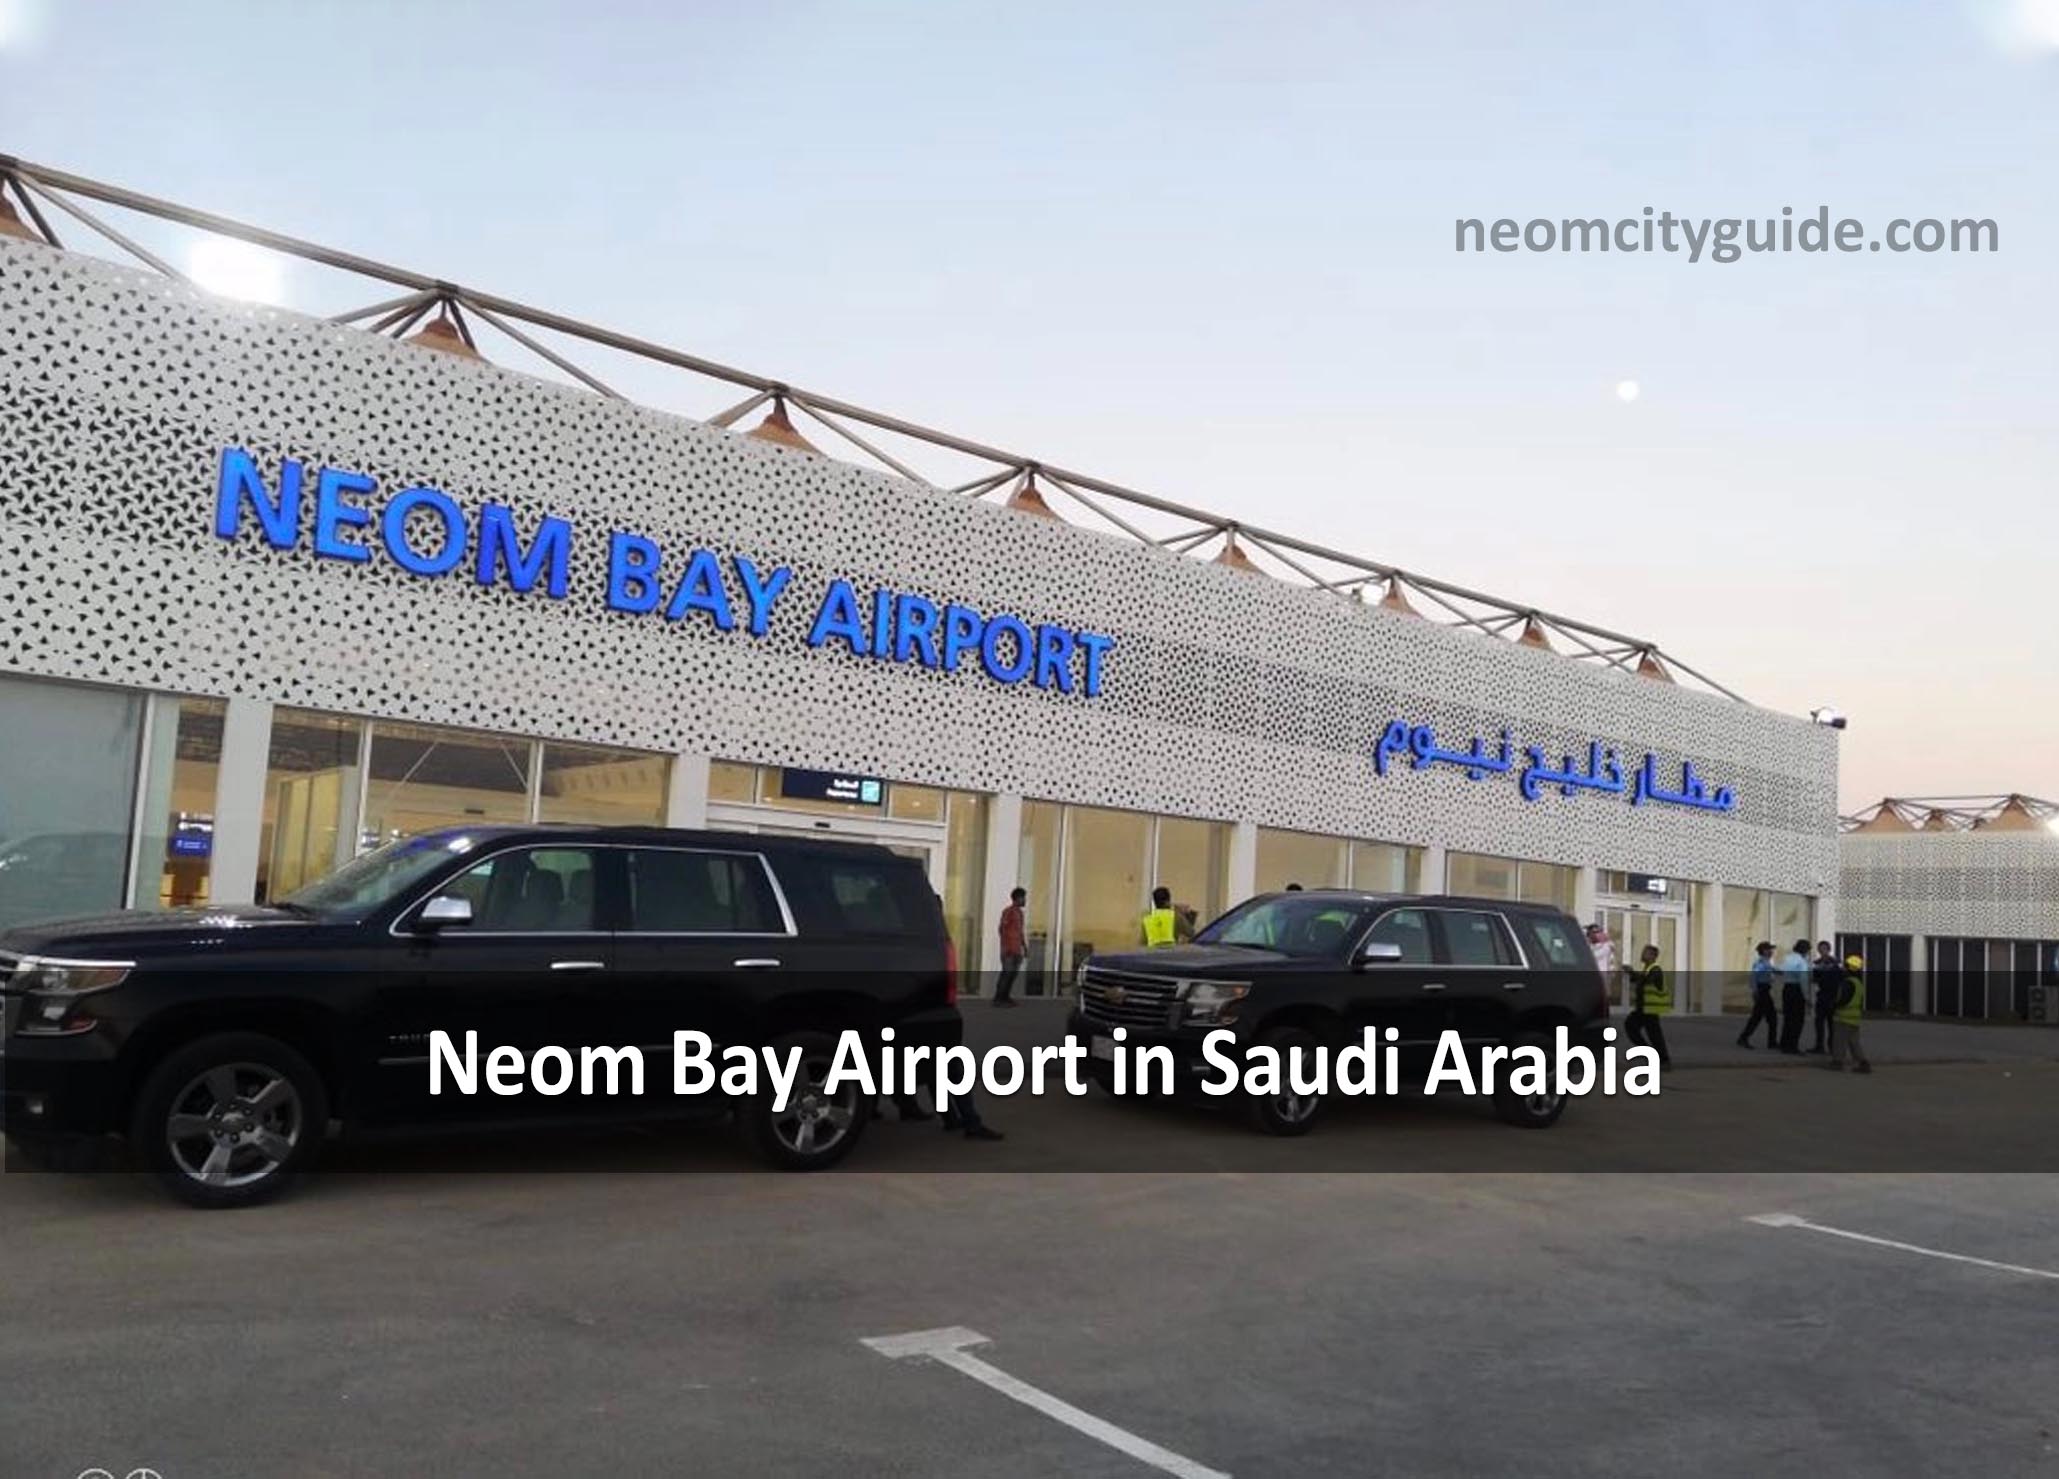 Qatar Airways landed it's first flight from Doha to Neom Bay Airport in ...